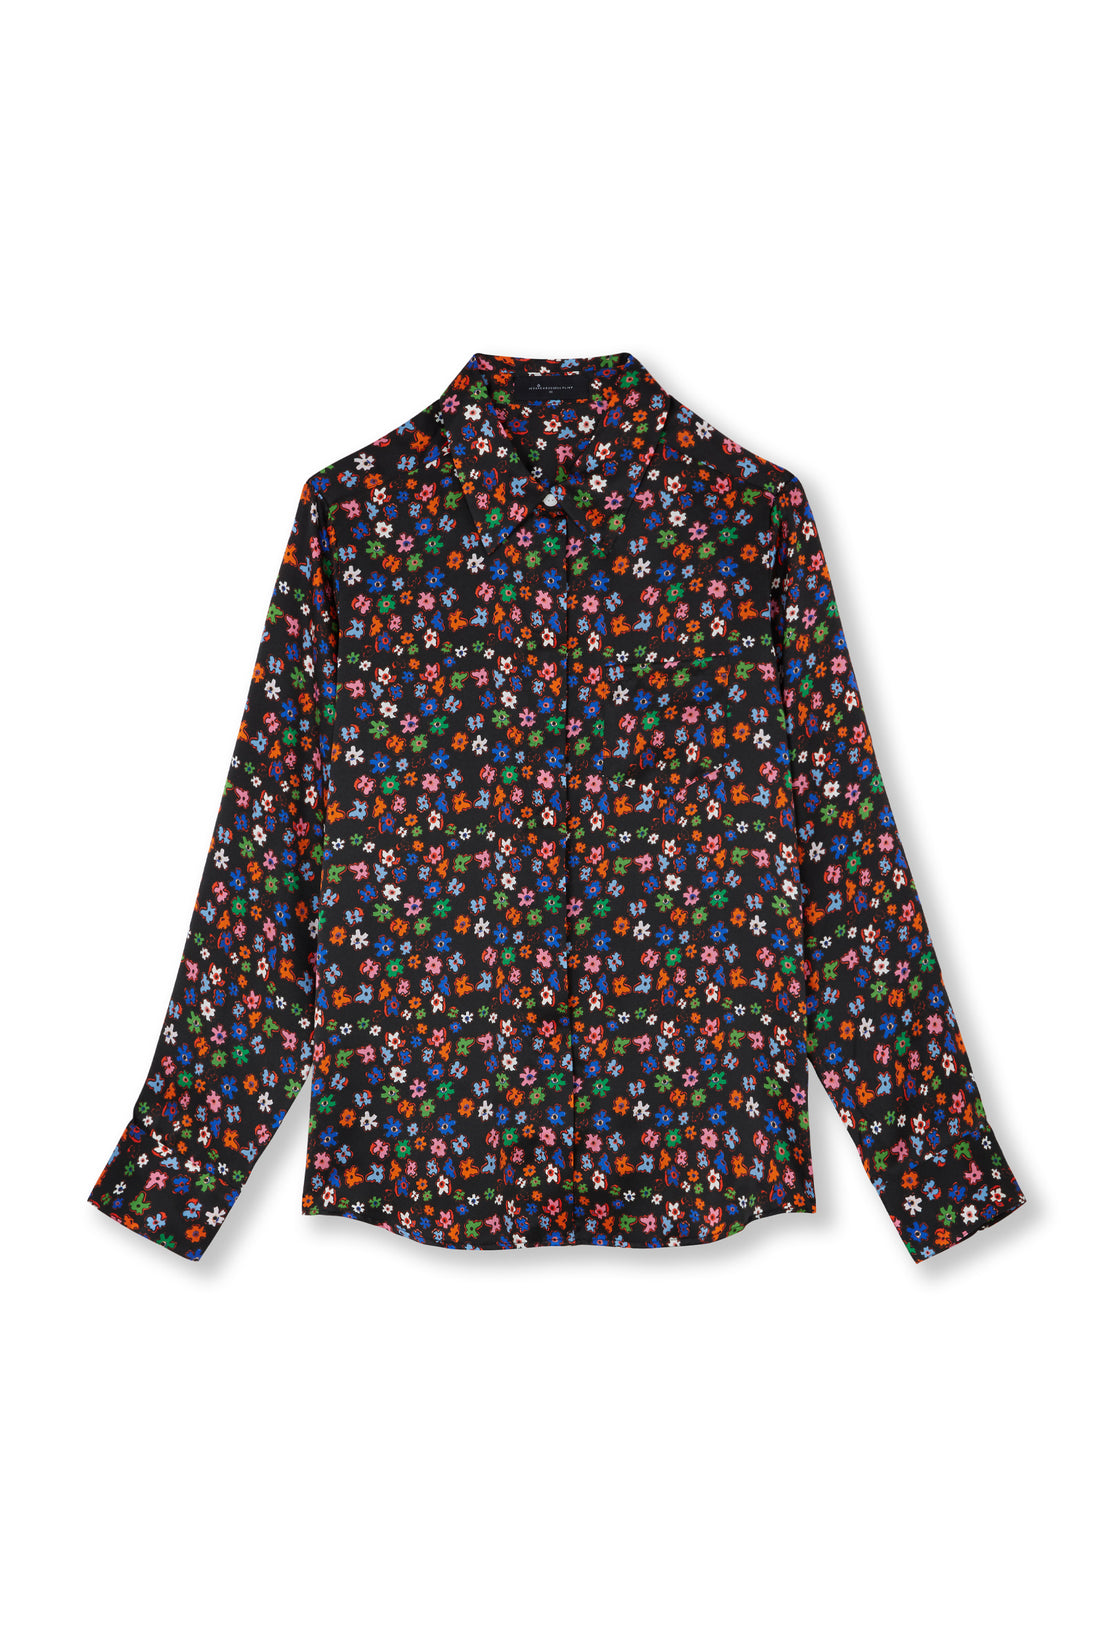 Jessica Russell Flint printed silk dark classic shirt with mixed small floral design